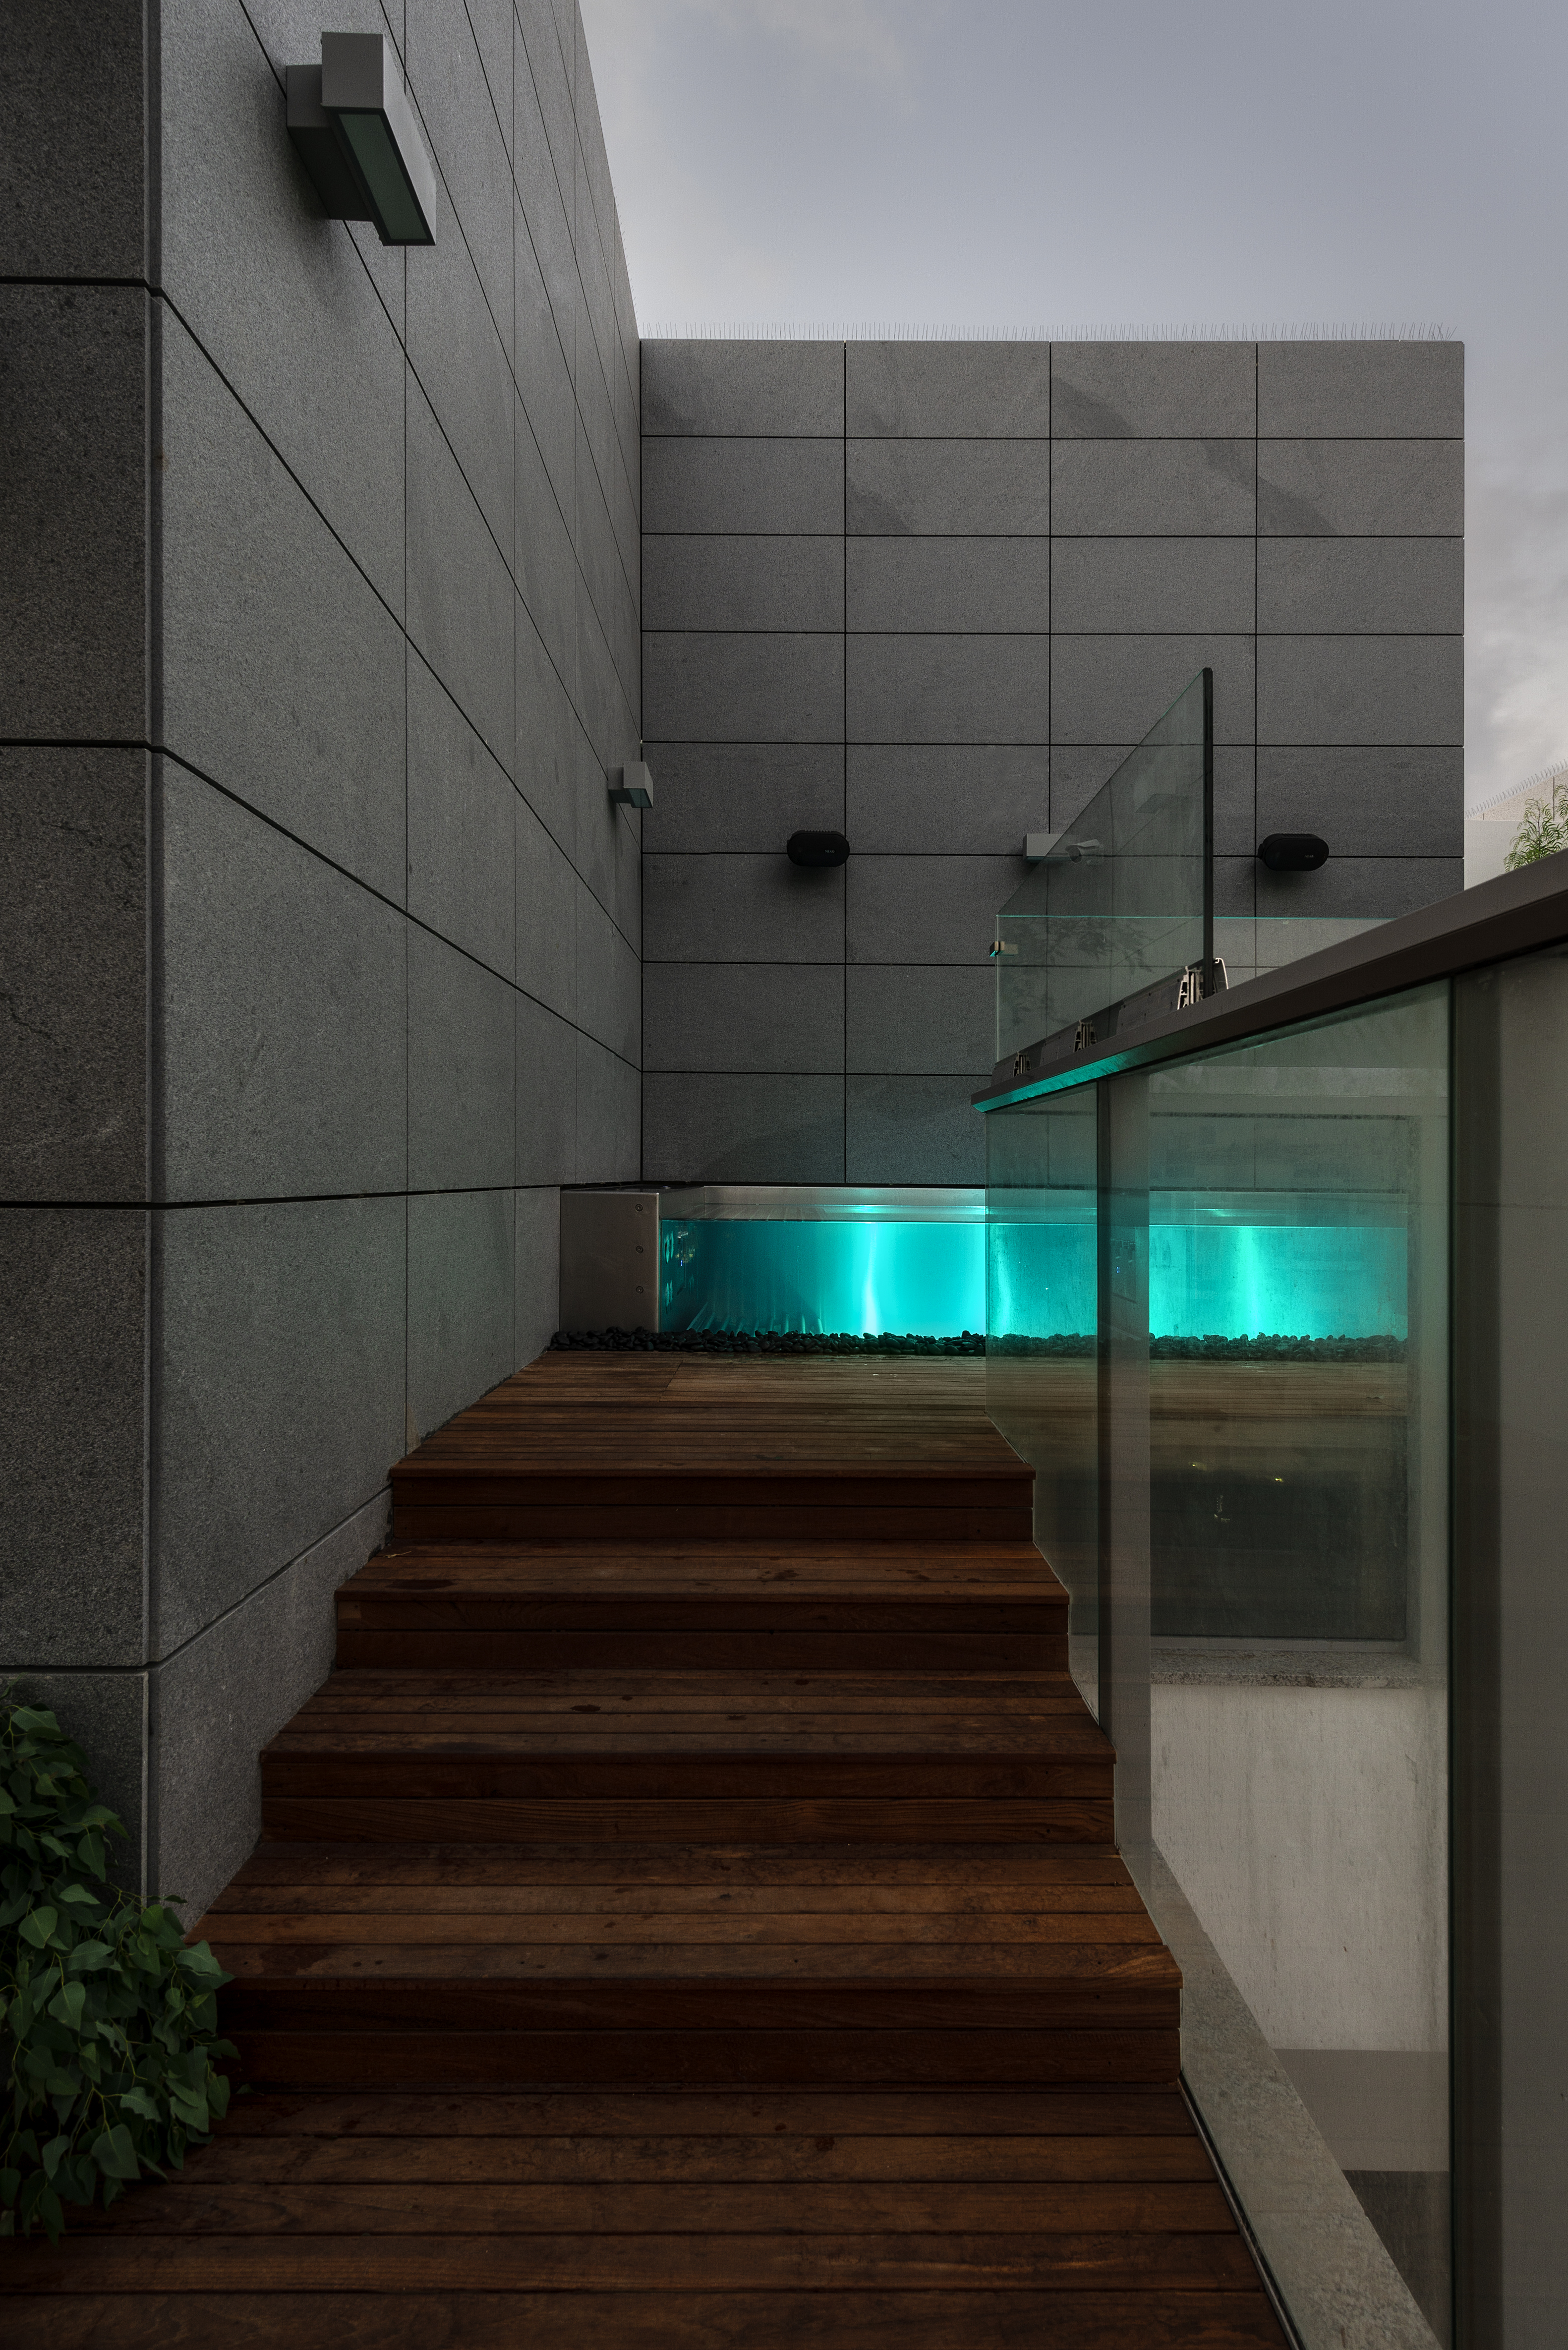 Design swimming pool by IMAGINOX on rooftop terrace